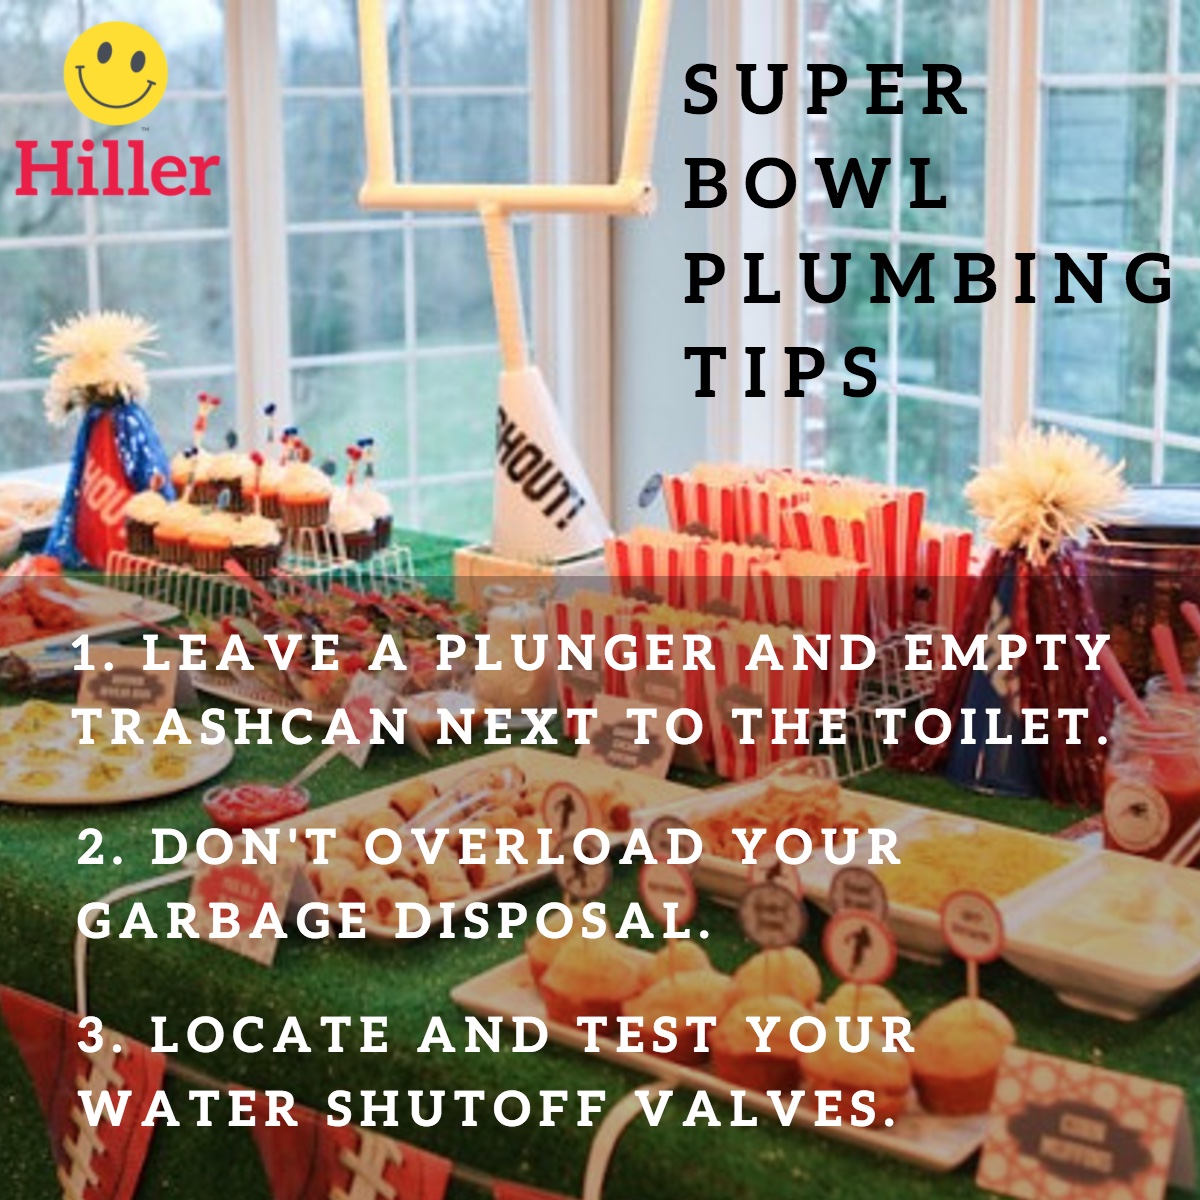 prevent plumbing problems for super bowl and large gatherings